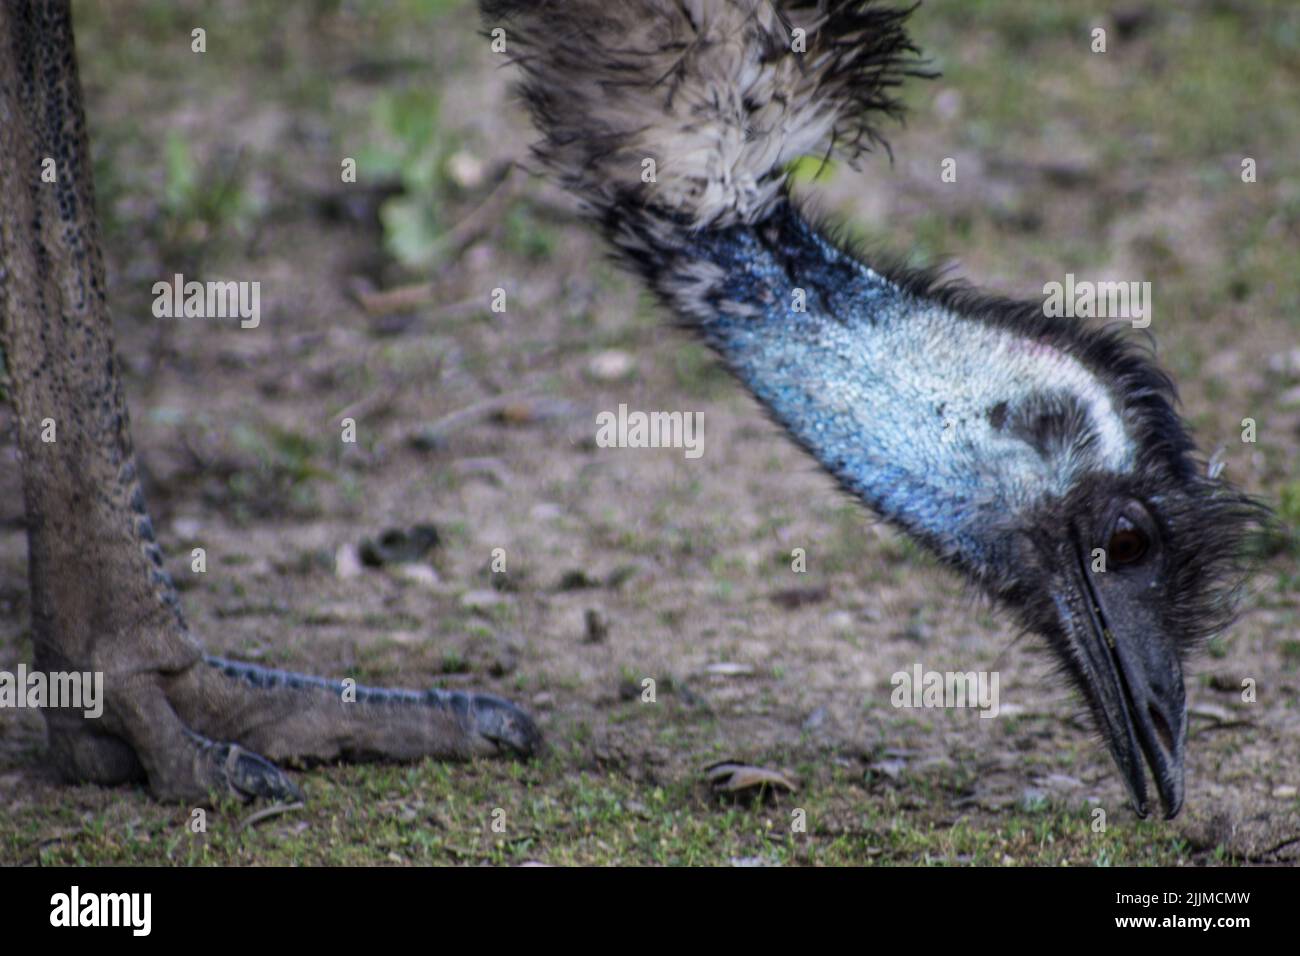 A closeup shot of an emu eating something from the ground Stock Photo